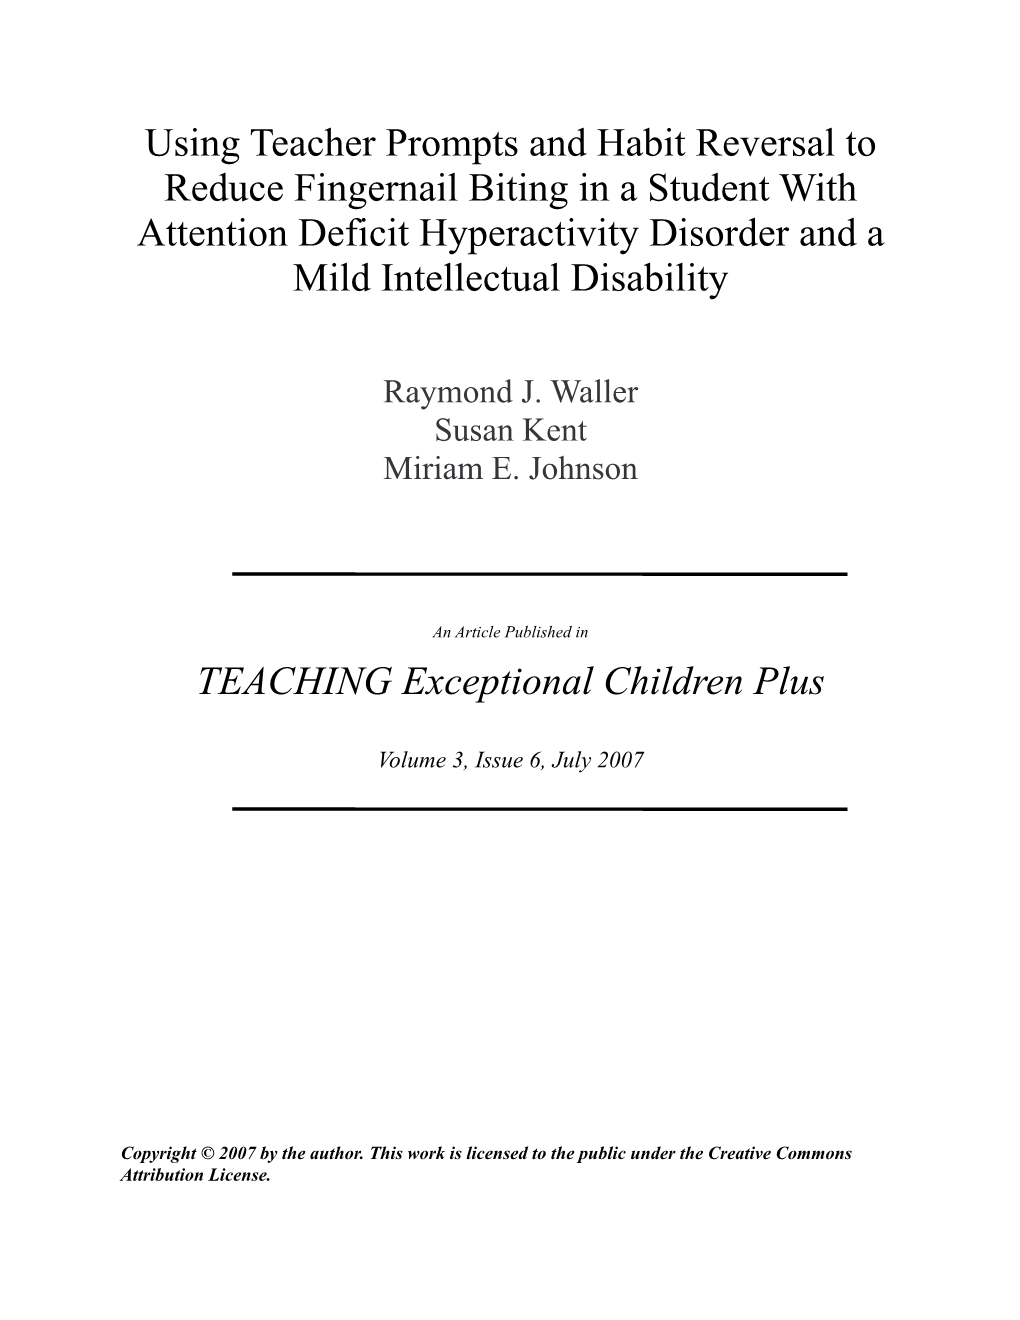 Using Teacher Prompts and Habit Reversal to Reduce Fingernail Biting in a Student with Attention Deficit Hyperactivity Disorder and a Mild Intellectual Disability